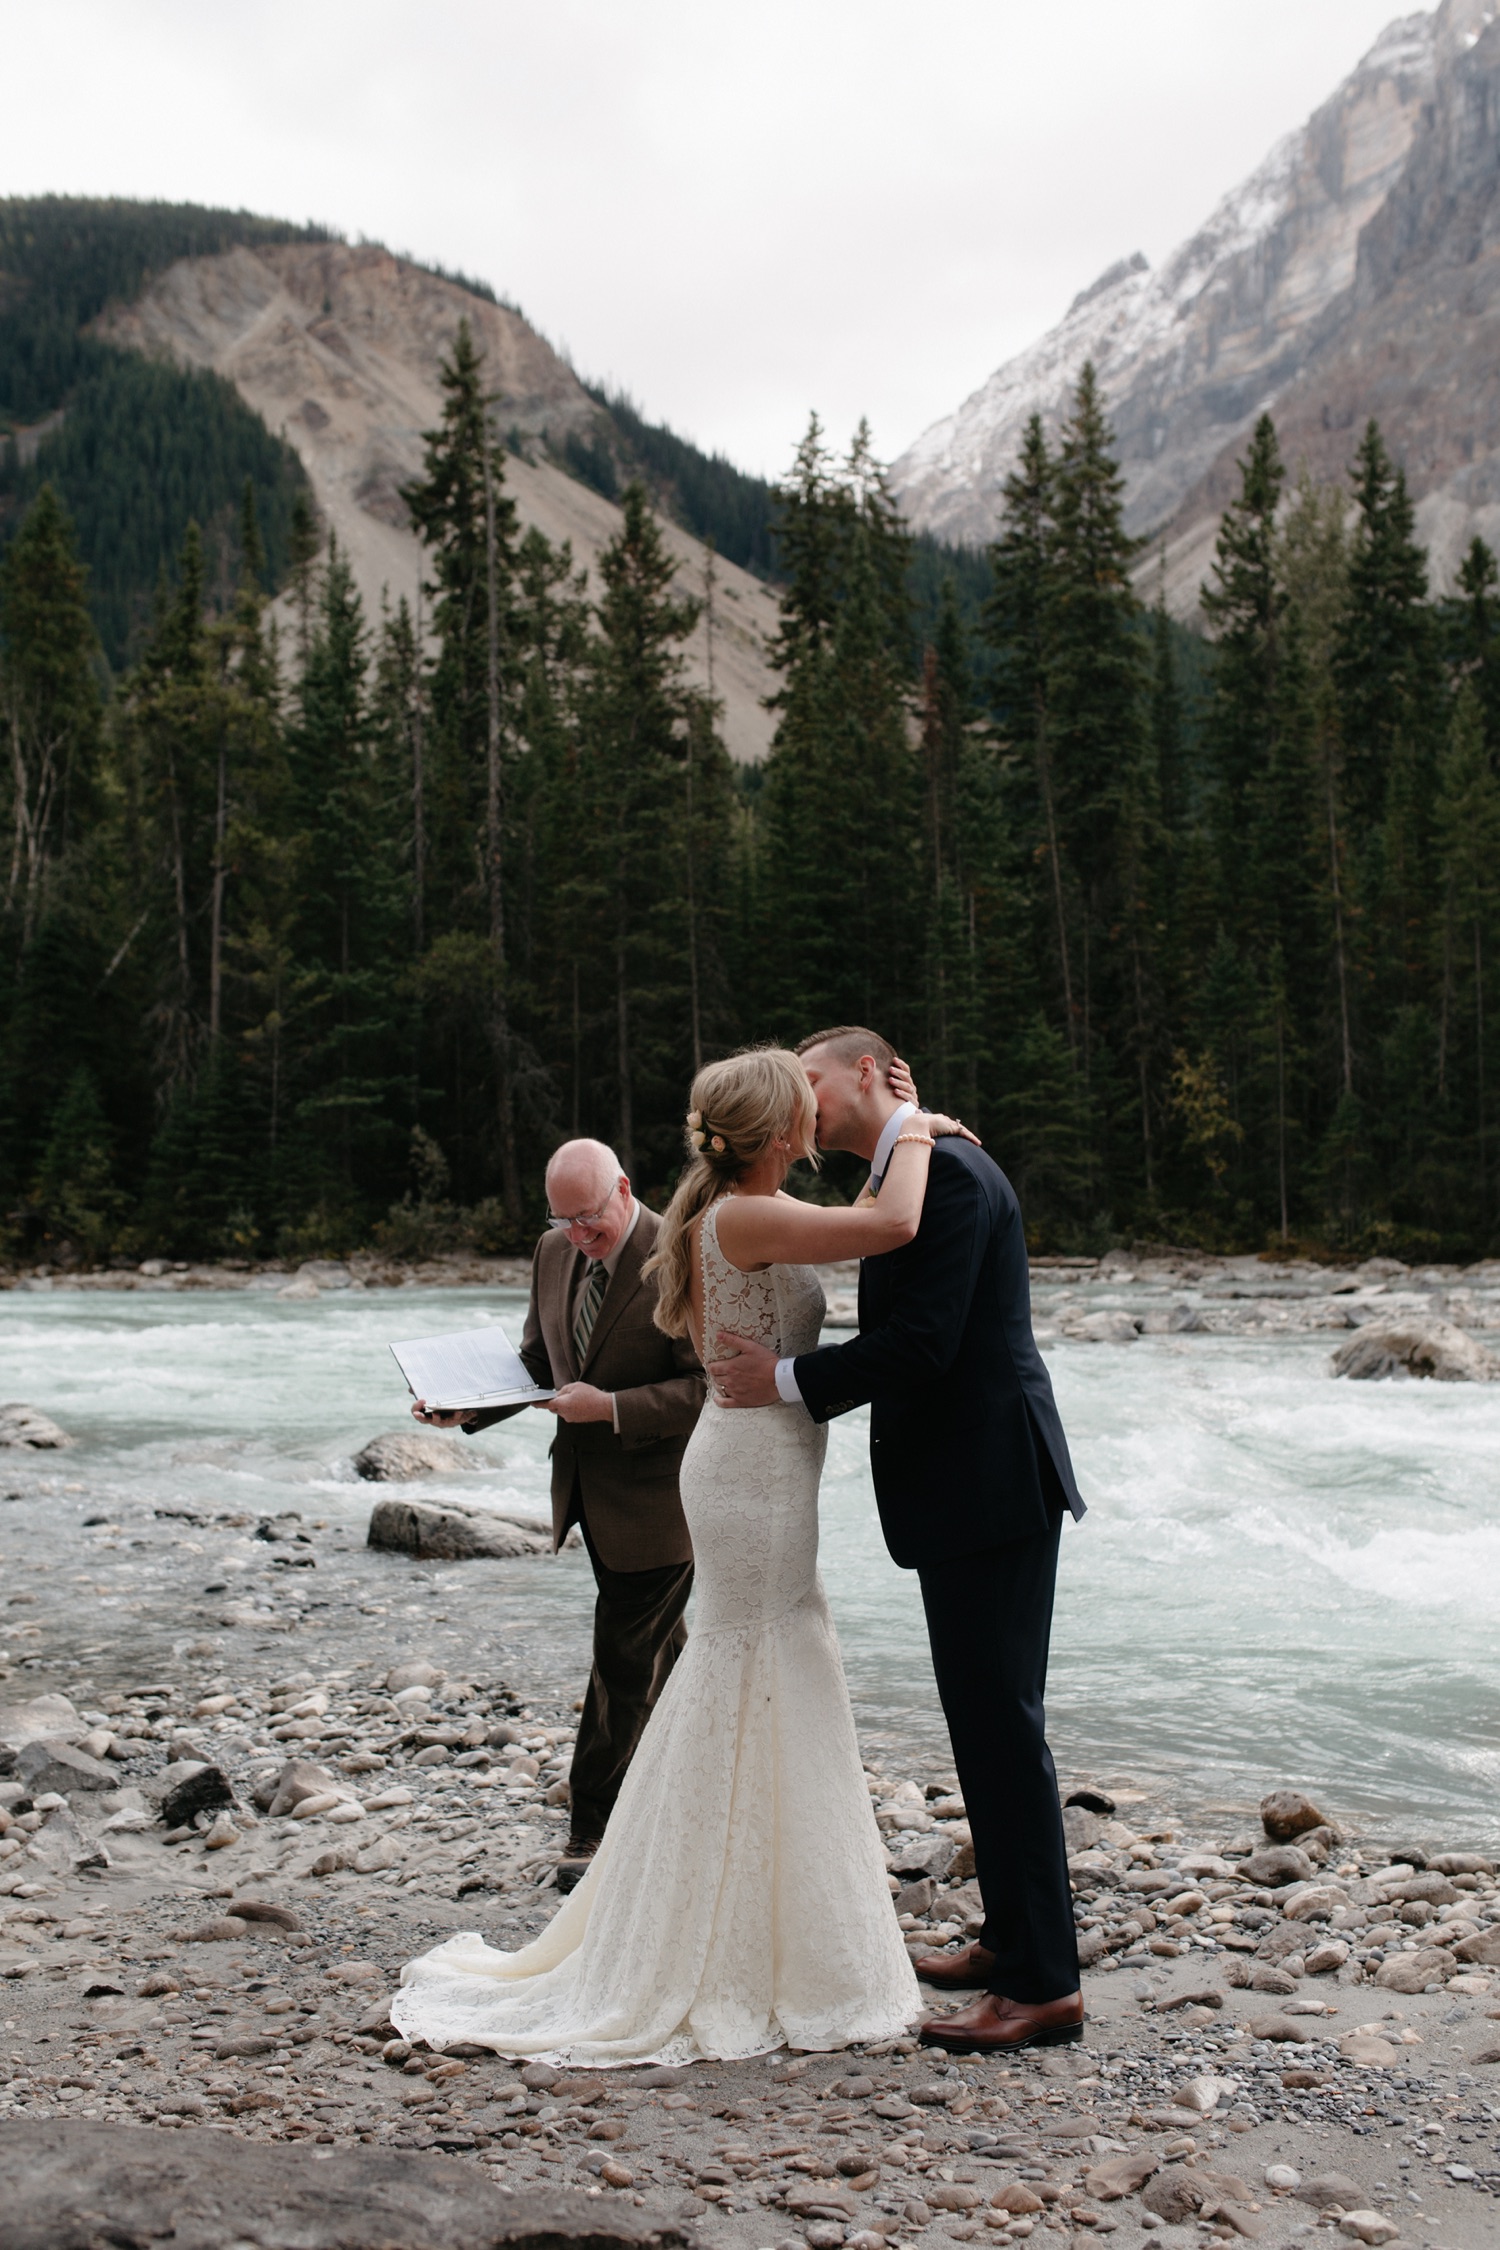 Cathedral Mountain Lodge elopement ceremony spot along the river